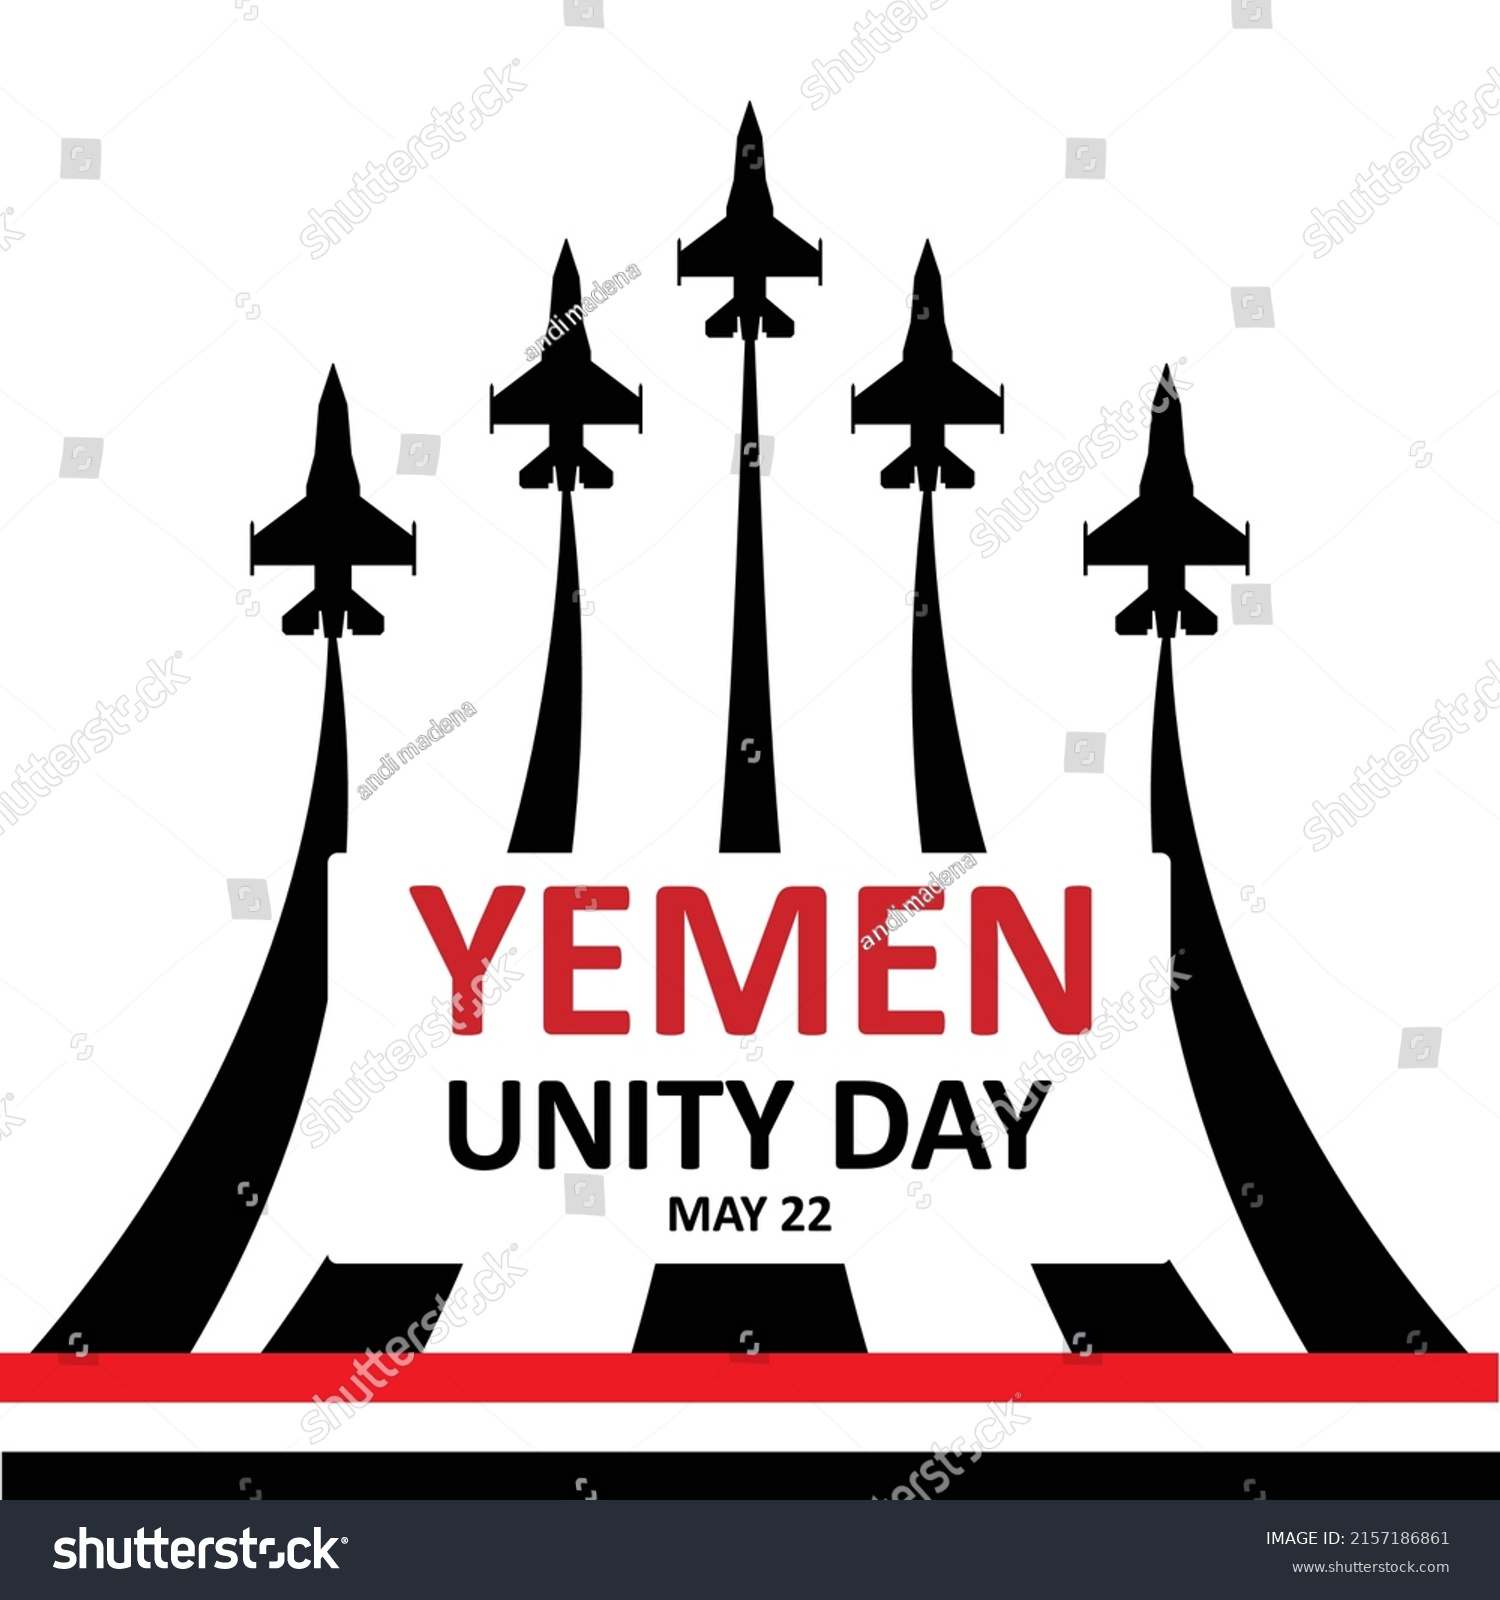 SVG of Yemen unity day vector illustration. National holiday celebration on May 22. Vector template for banner, typography poster, flyer, greeting card, etc. svg